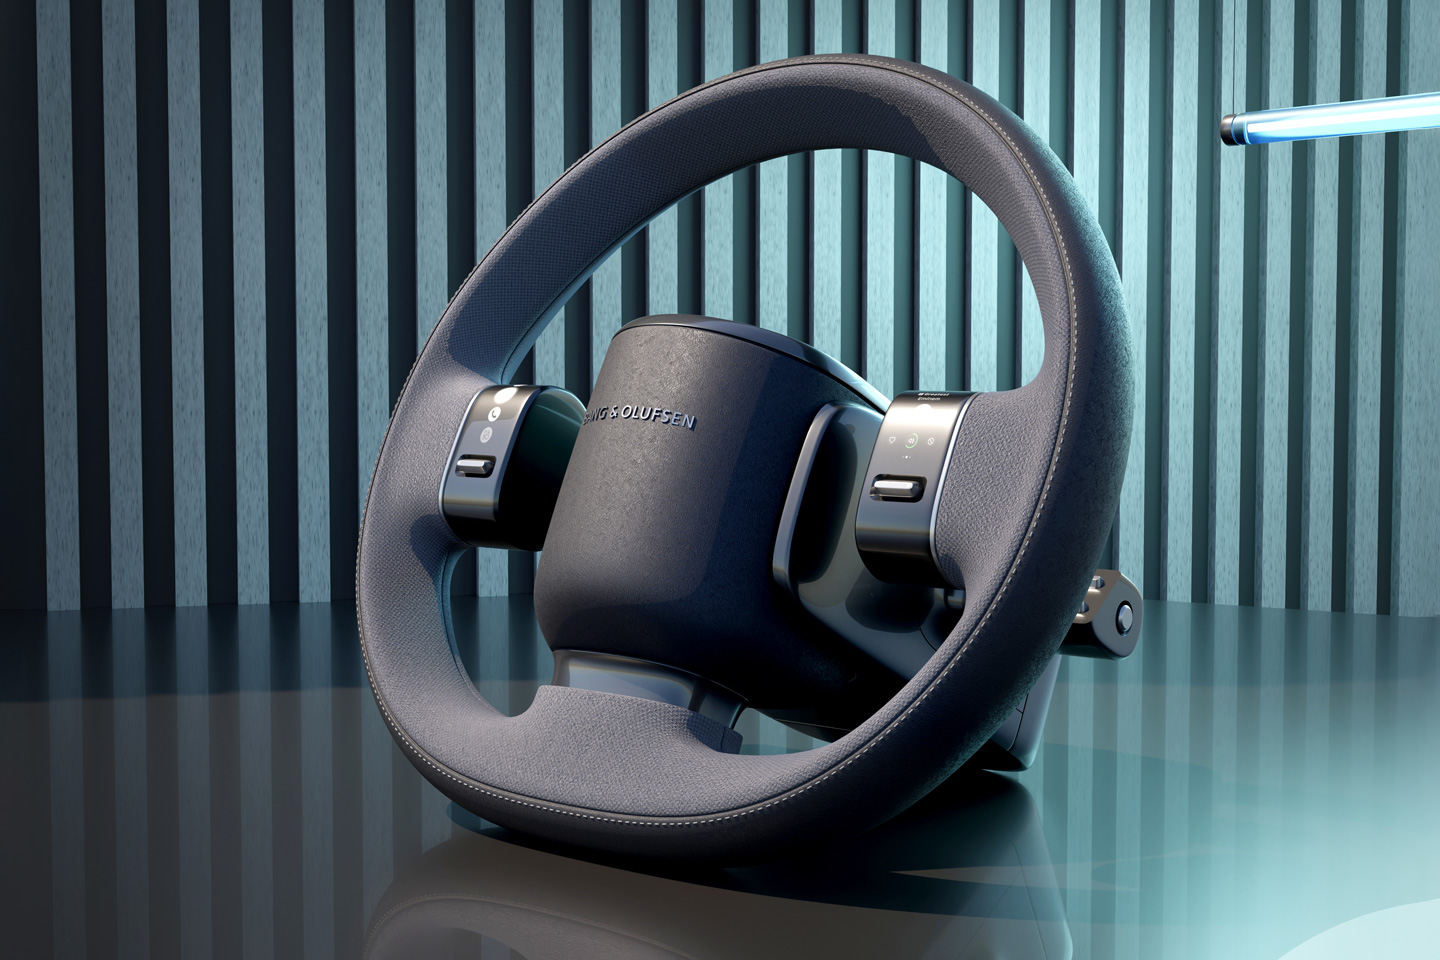 #Bang & Olufsen Steering Wheel Concept paints a wild picture of the future of infotainment and smart cars